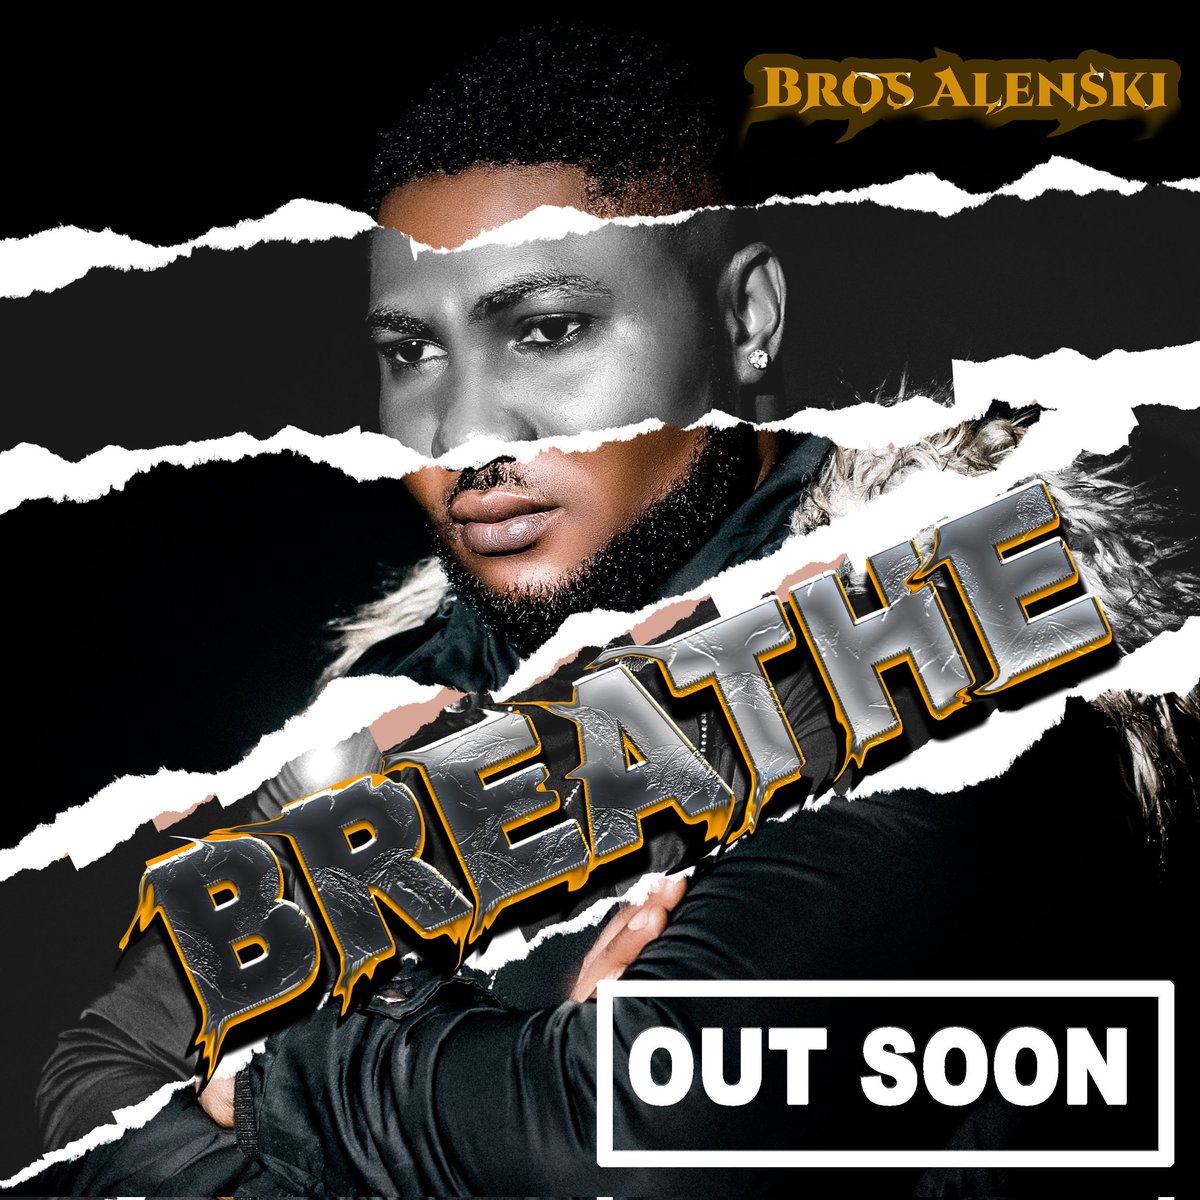 My upcoming release 'BREATHE'.

Dropping soon🔥🎵

#brosalenski #upcomingrelease #newsong #spotify